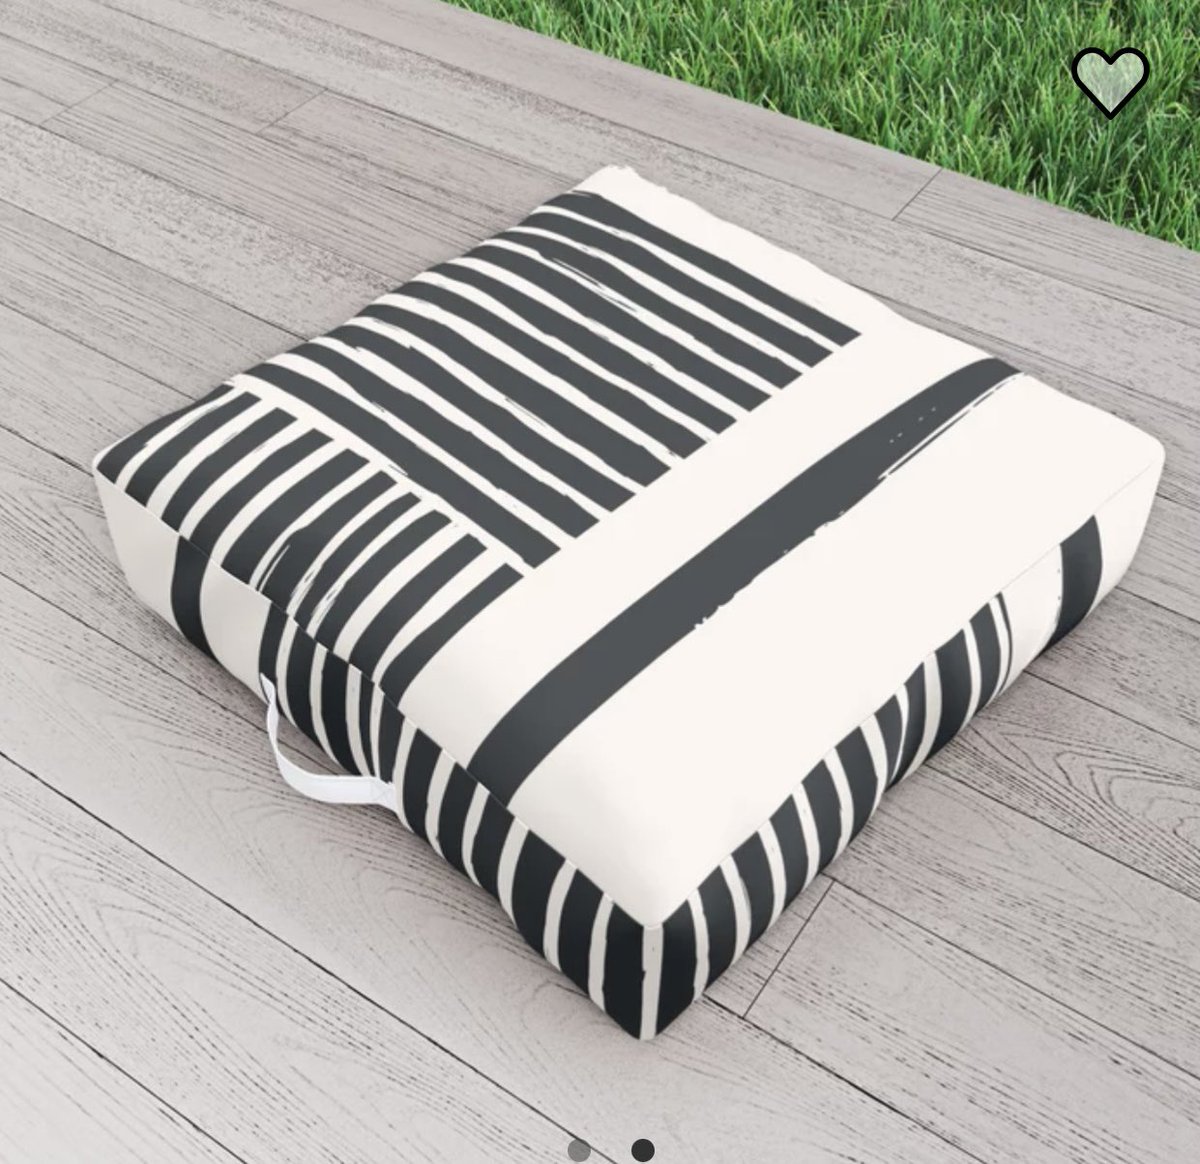 society6.com/product/old-li… #outdoorseating #floorcushion #outdoorliving #outdoorfurniture #bbqlife #patiodecor #lineart #blackandwhite #backyard #inkart #square #modernart #modernhome #balcony #society6 #weekendvibes #brush